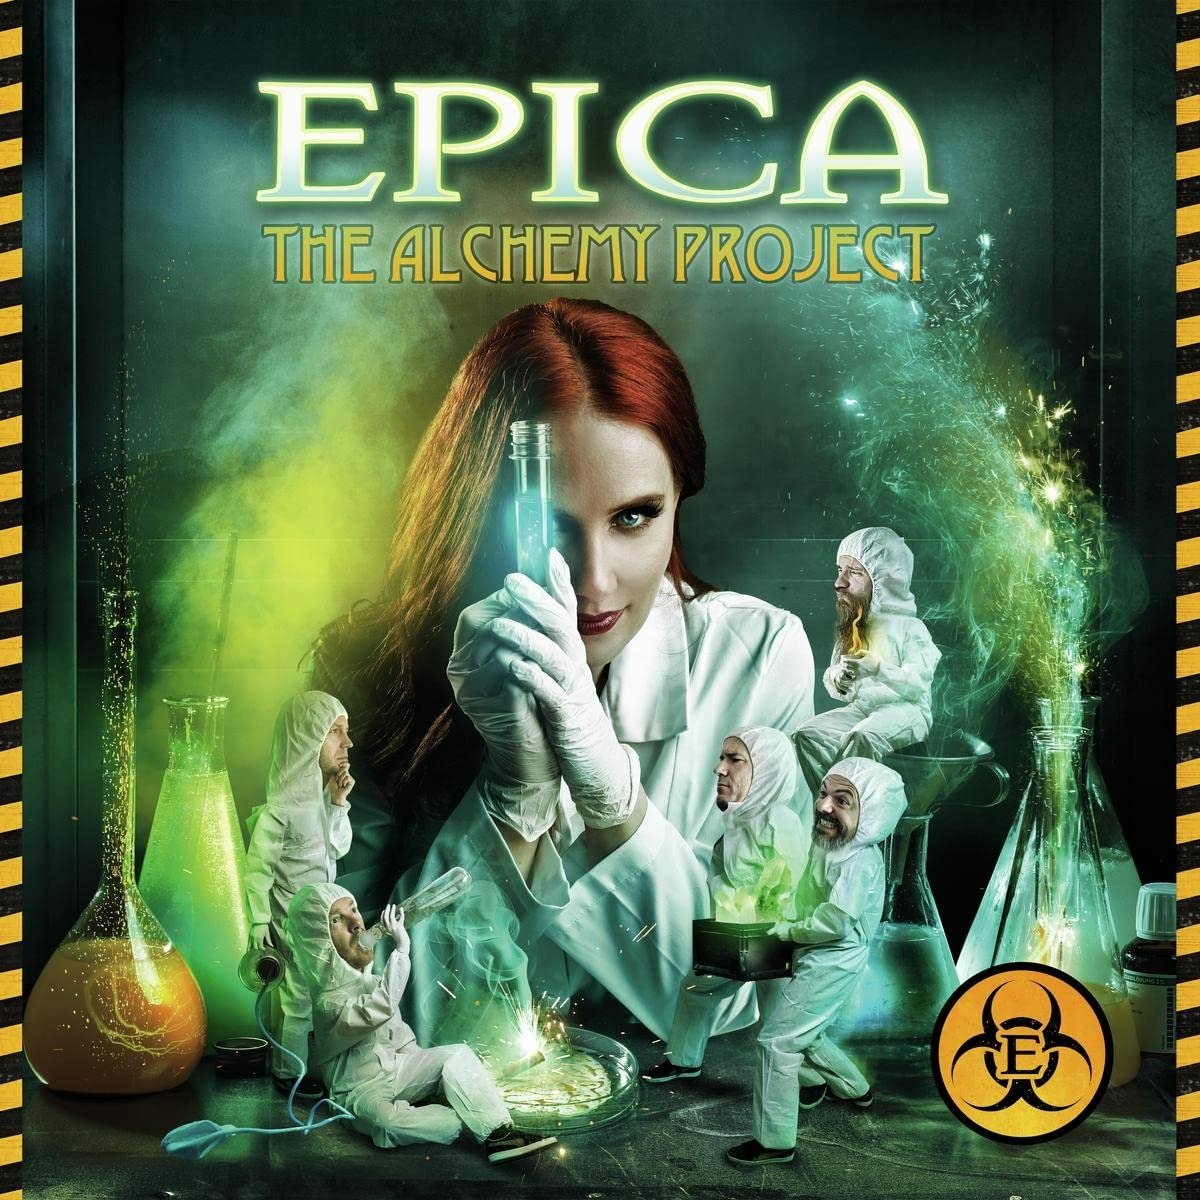 EPICA - THE ALCHEMY PROJECT (EP) (TOXIC GREEN MARBLED VINYL), Vinyl